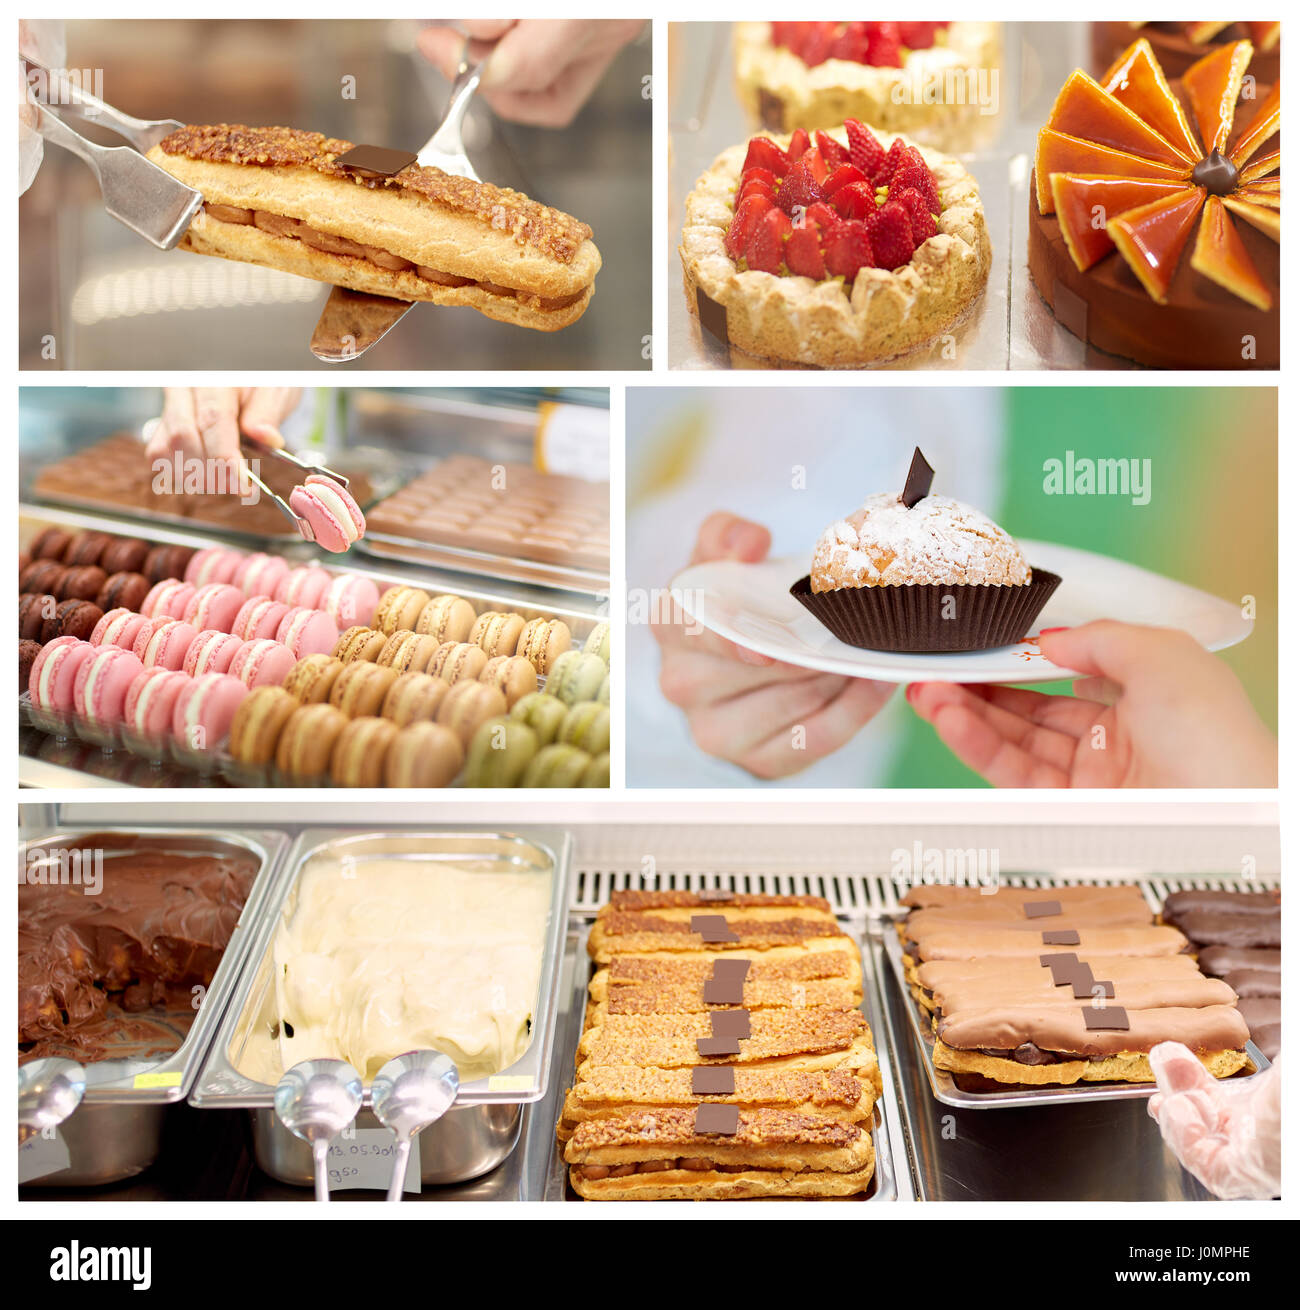 Sweets in pastry shop, collage Stock Photo